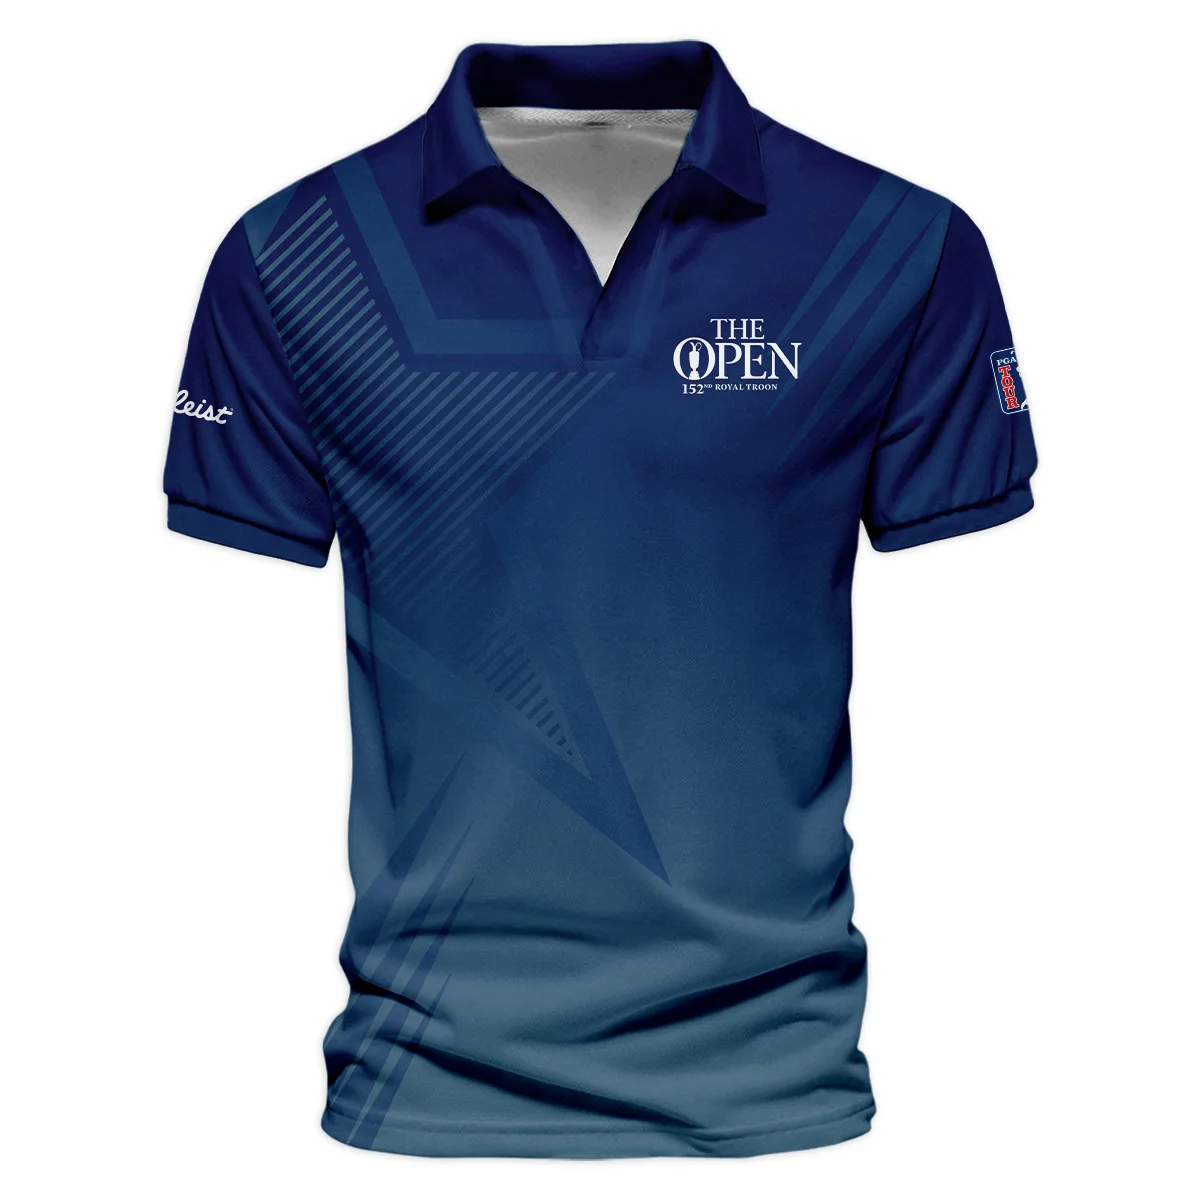 Titleist 152nd Open Championship Abstract Background Dark Blue Gradient Star Line Quarter-Zip Jacket All Over Prints HOTOP260624A04TLSWZ